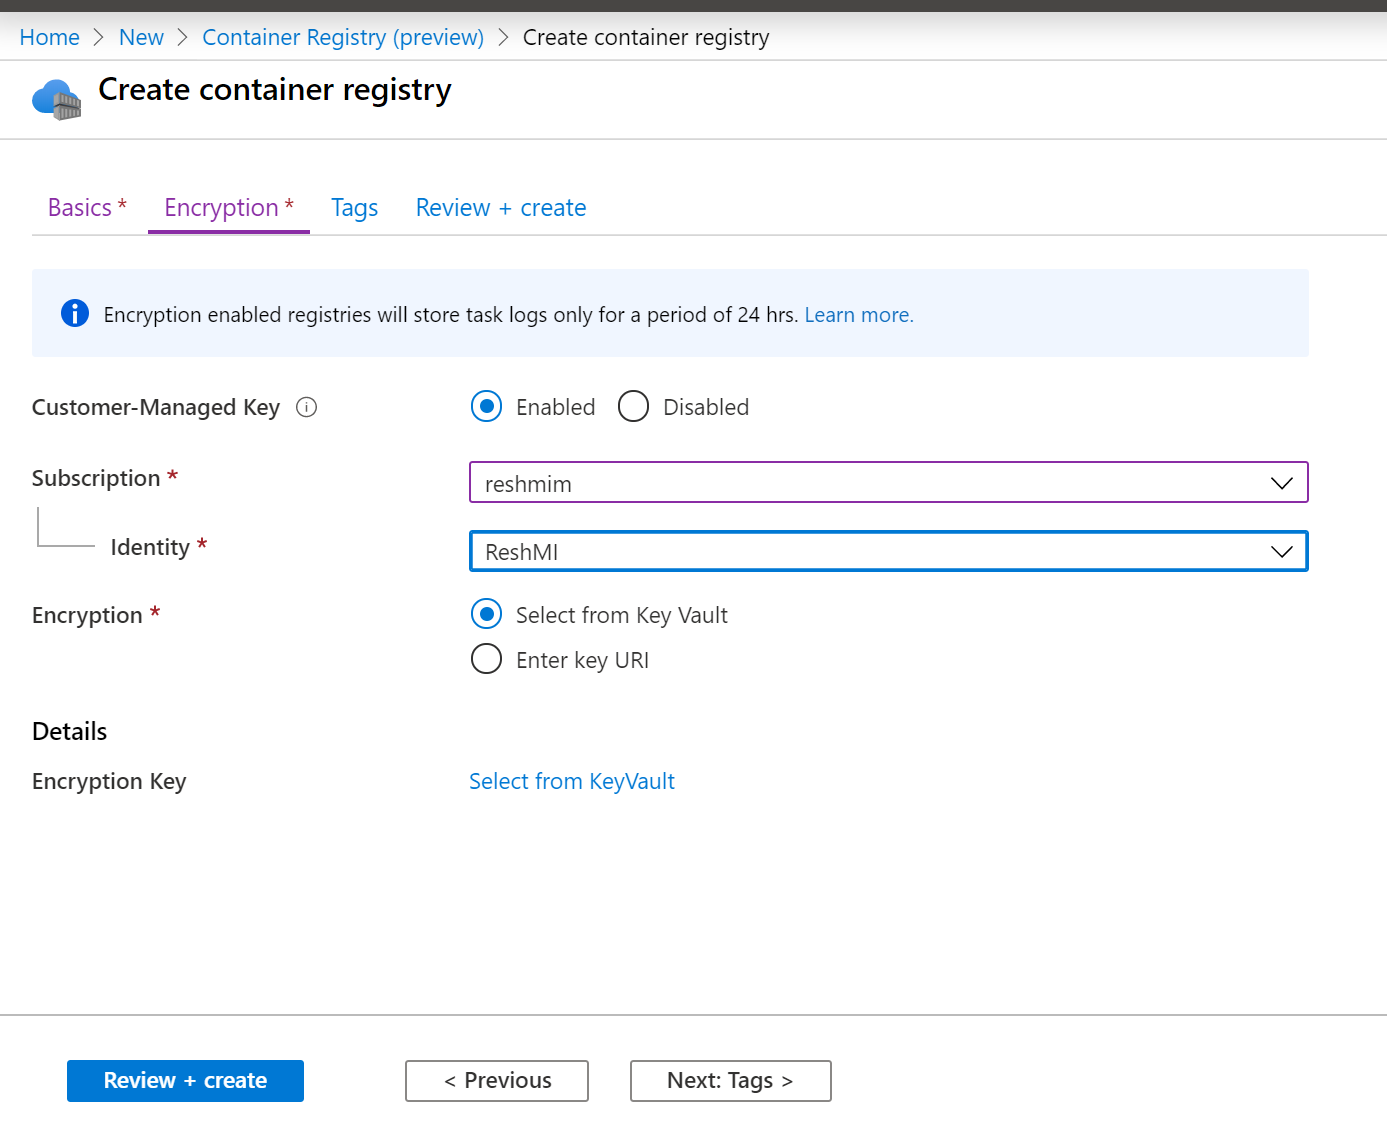 Azure Container Registry: Preview of customer-managed keys